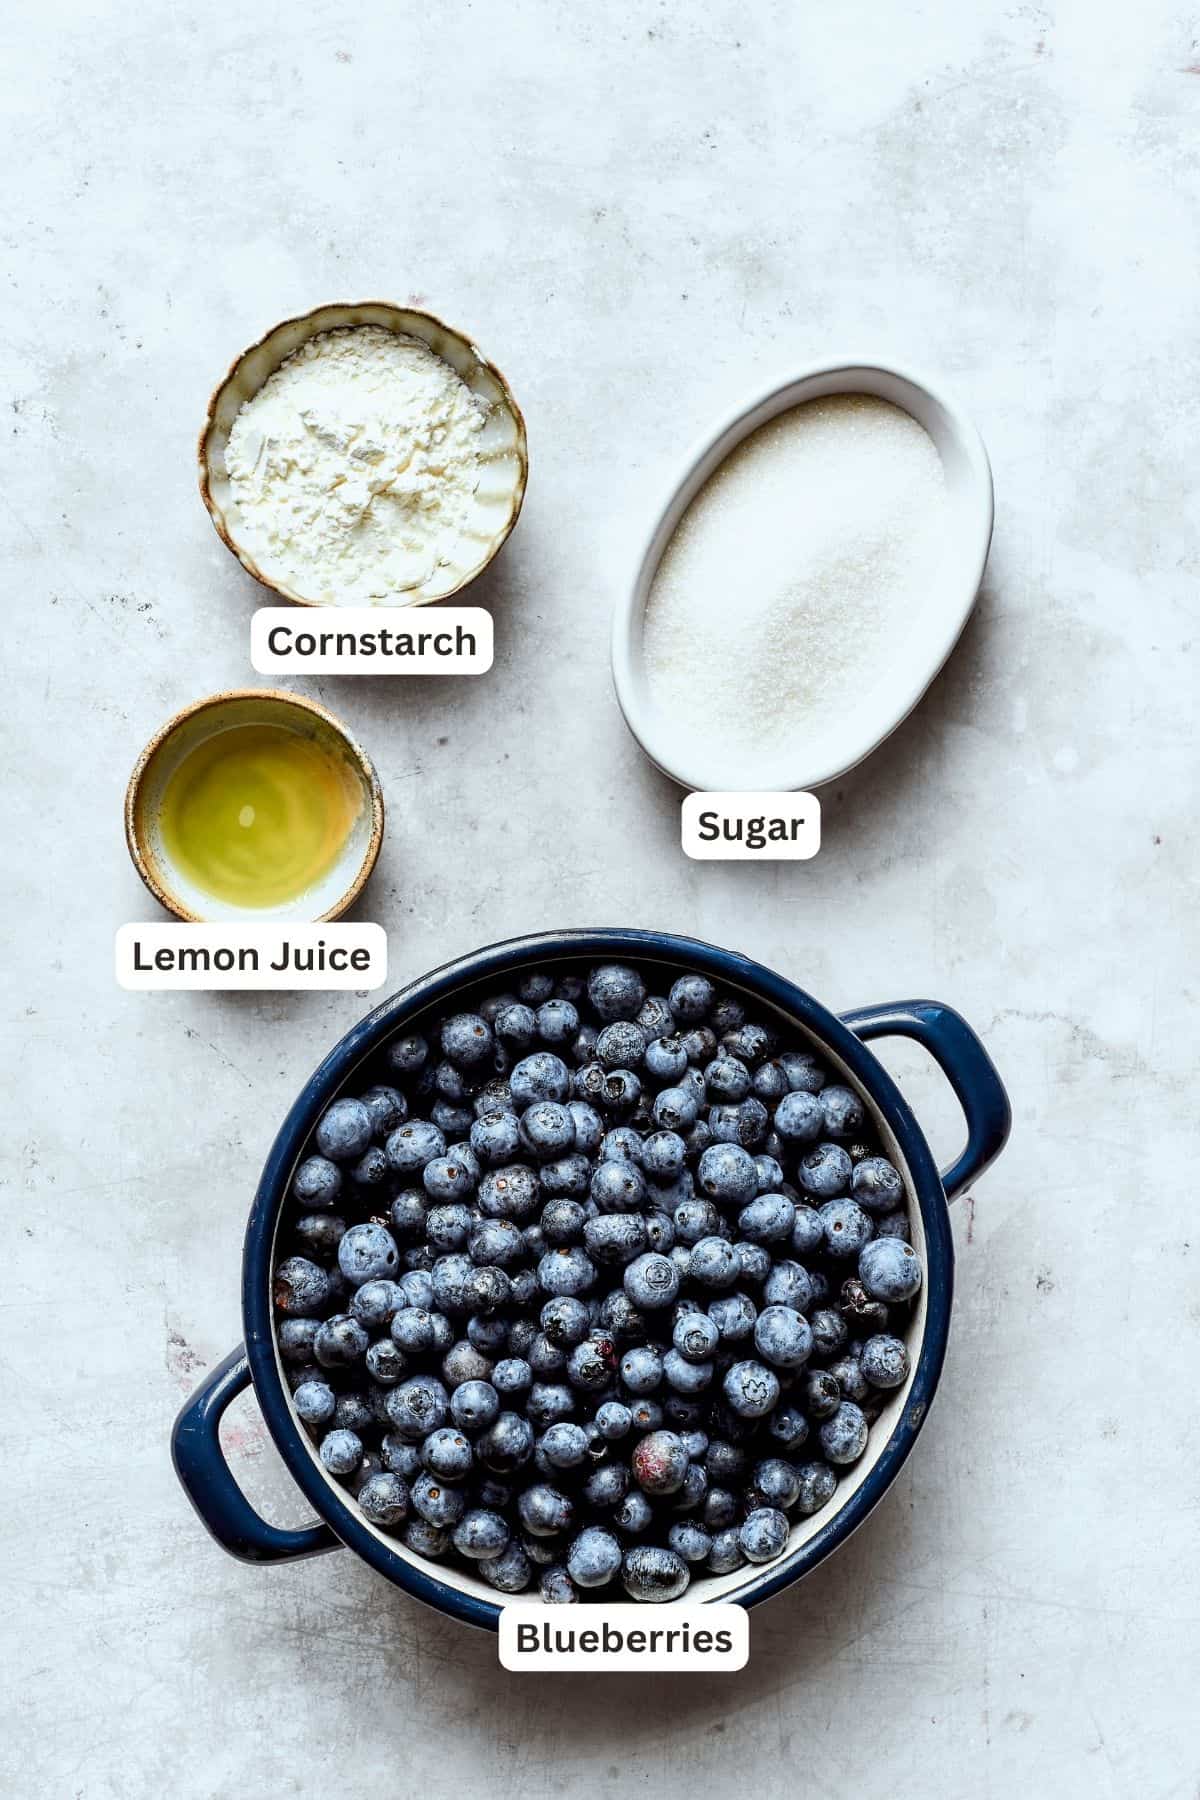 Ingredients for blueberry crisp filling are labeled and portioned: cornstarch, sugar, blueberries, lemon juice.